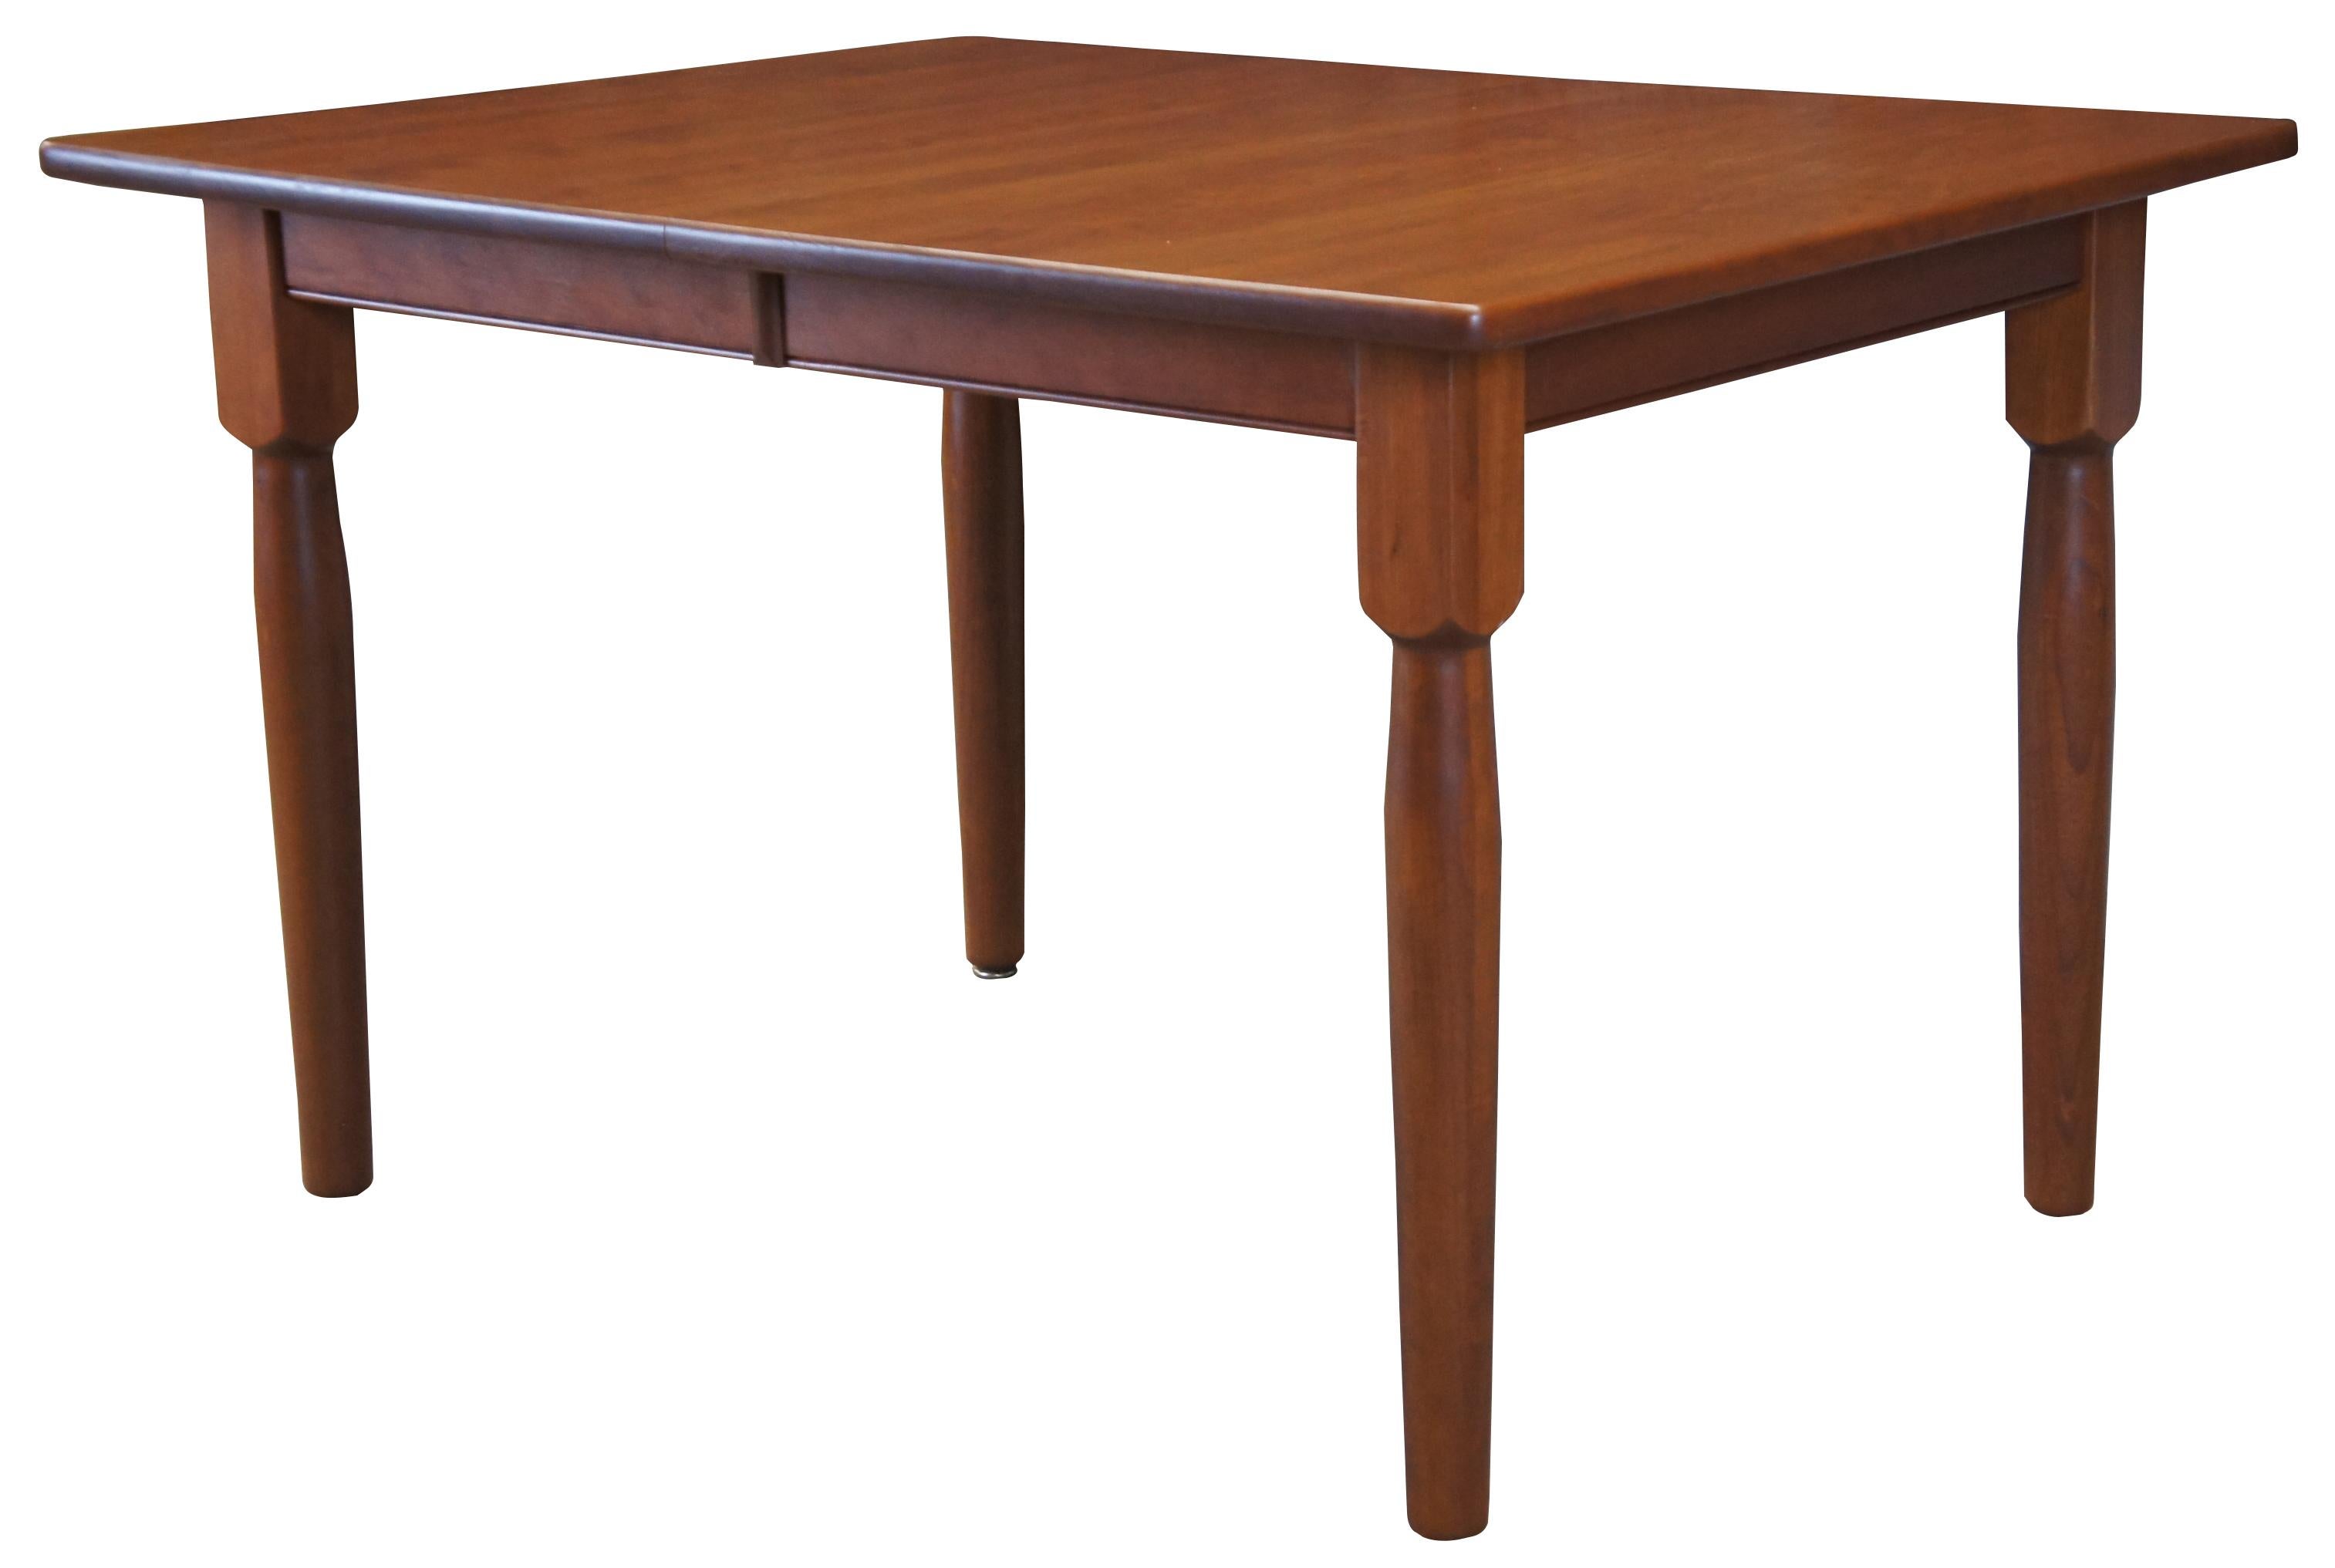 Amish made handcrafted cherry dining table. Rectangular form with turned legs. Features (3) 11